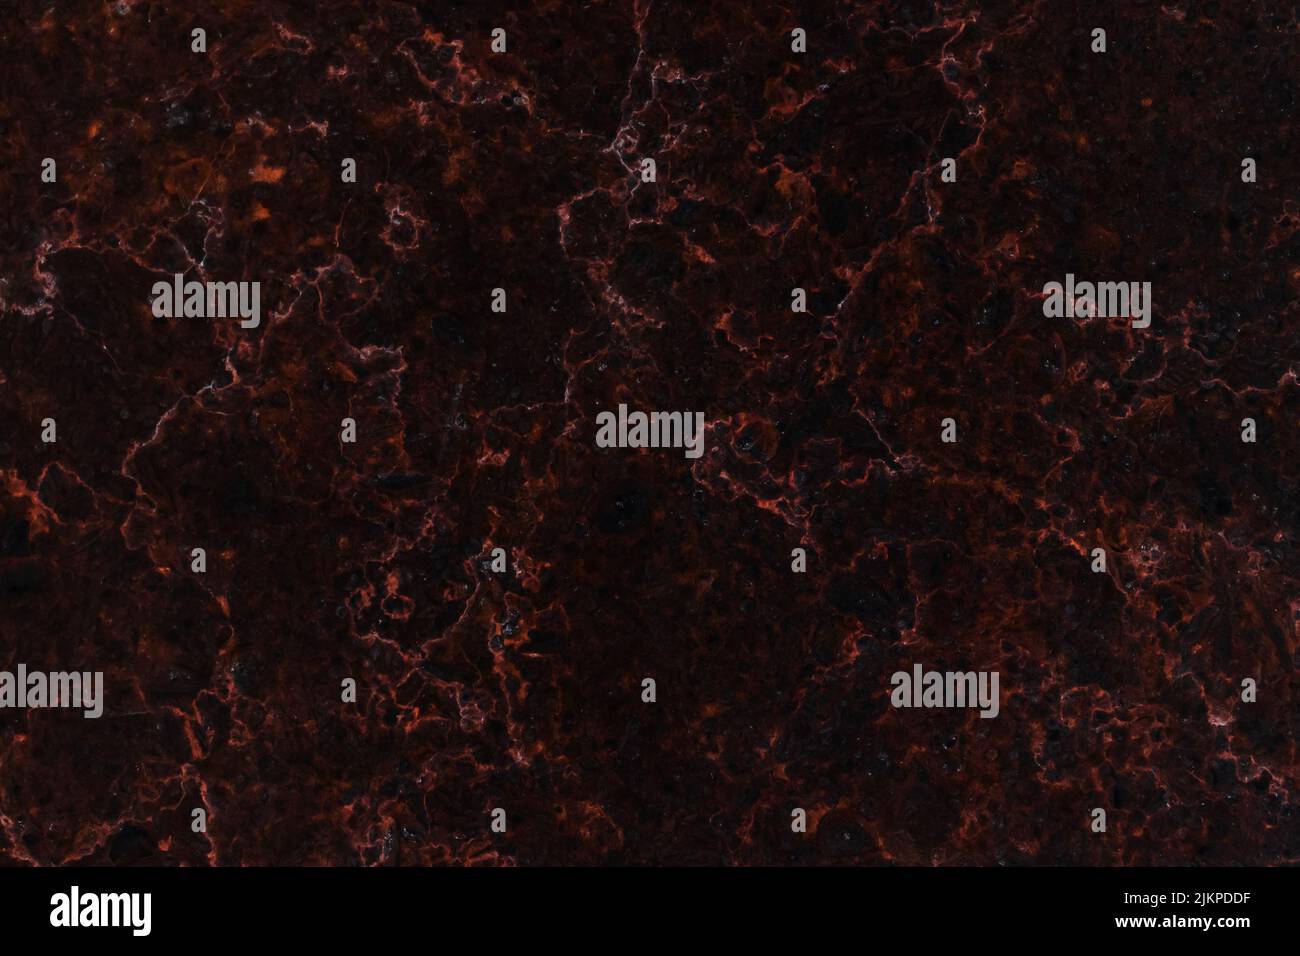 Black marble texture with red veins. Abstract background photo, front view Stock Photo